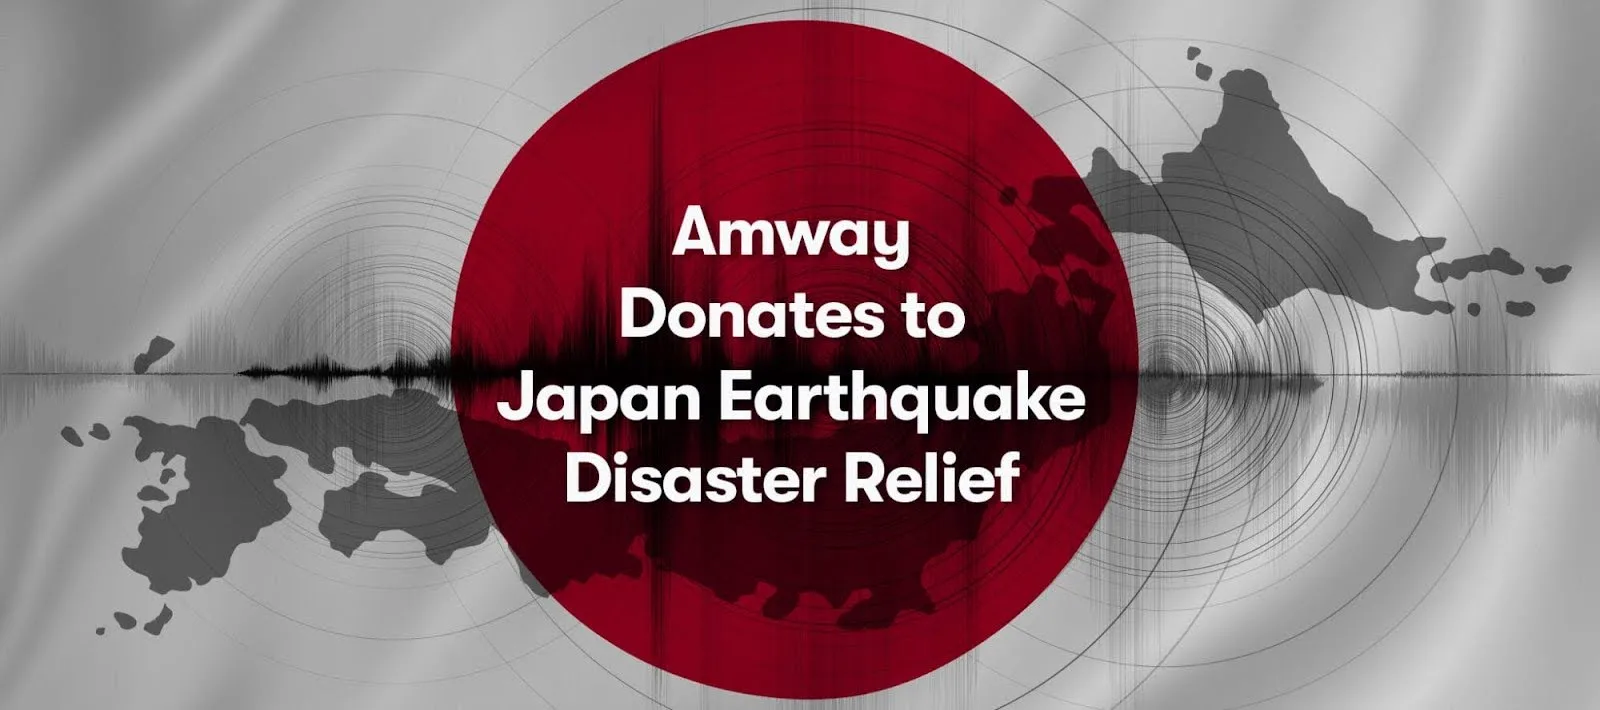 Amway donates to Japan earthquake disaster relief.